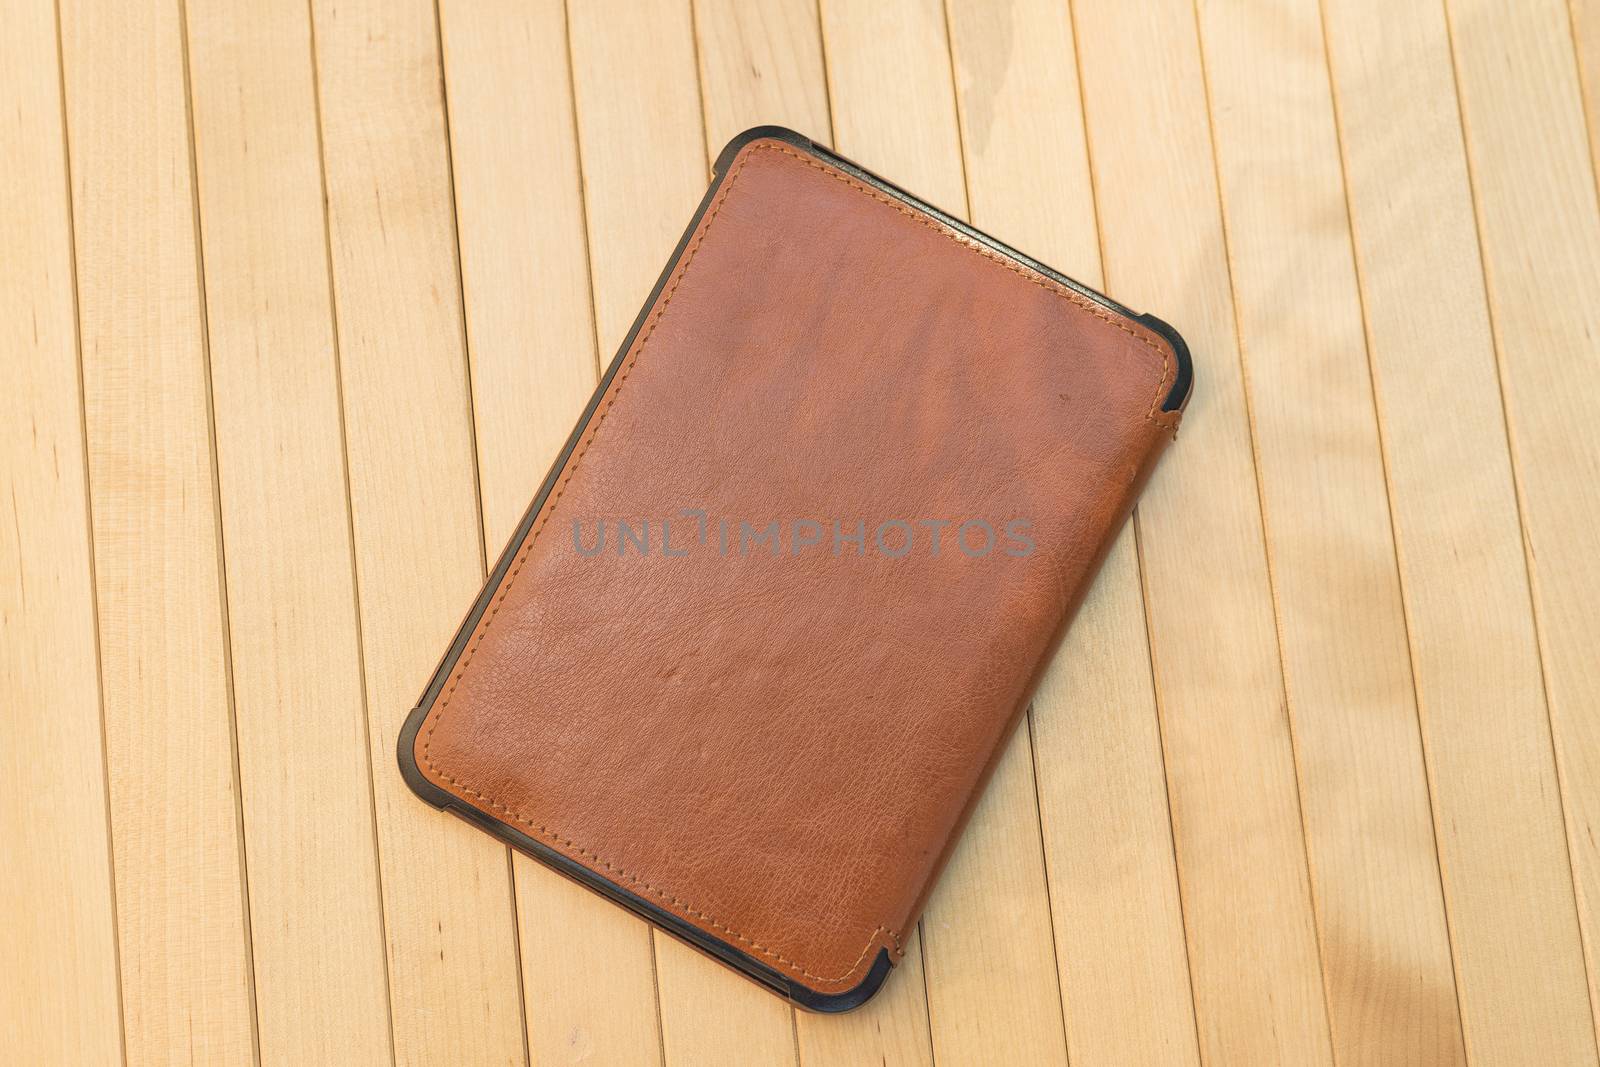 e-book on wooden background